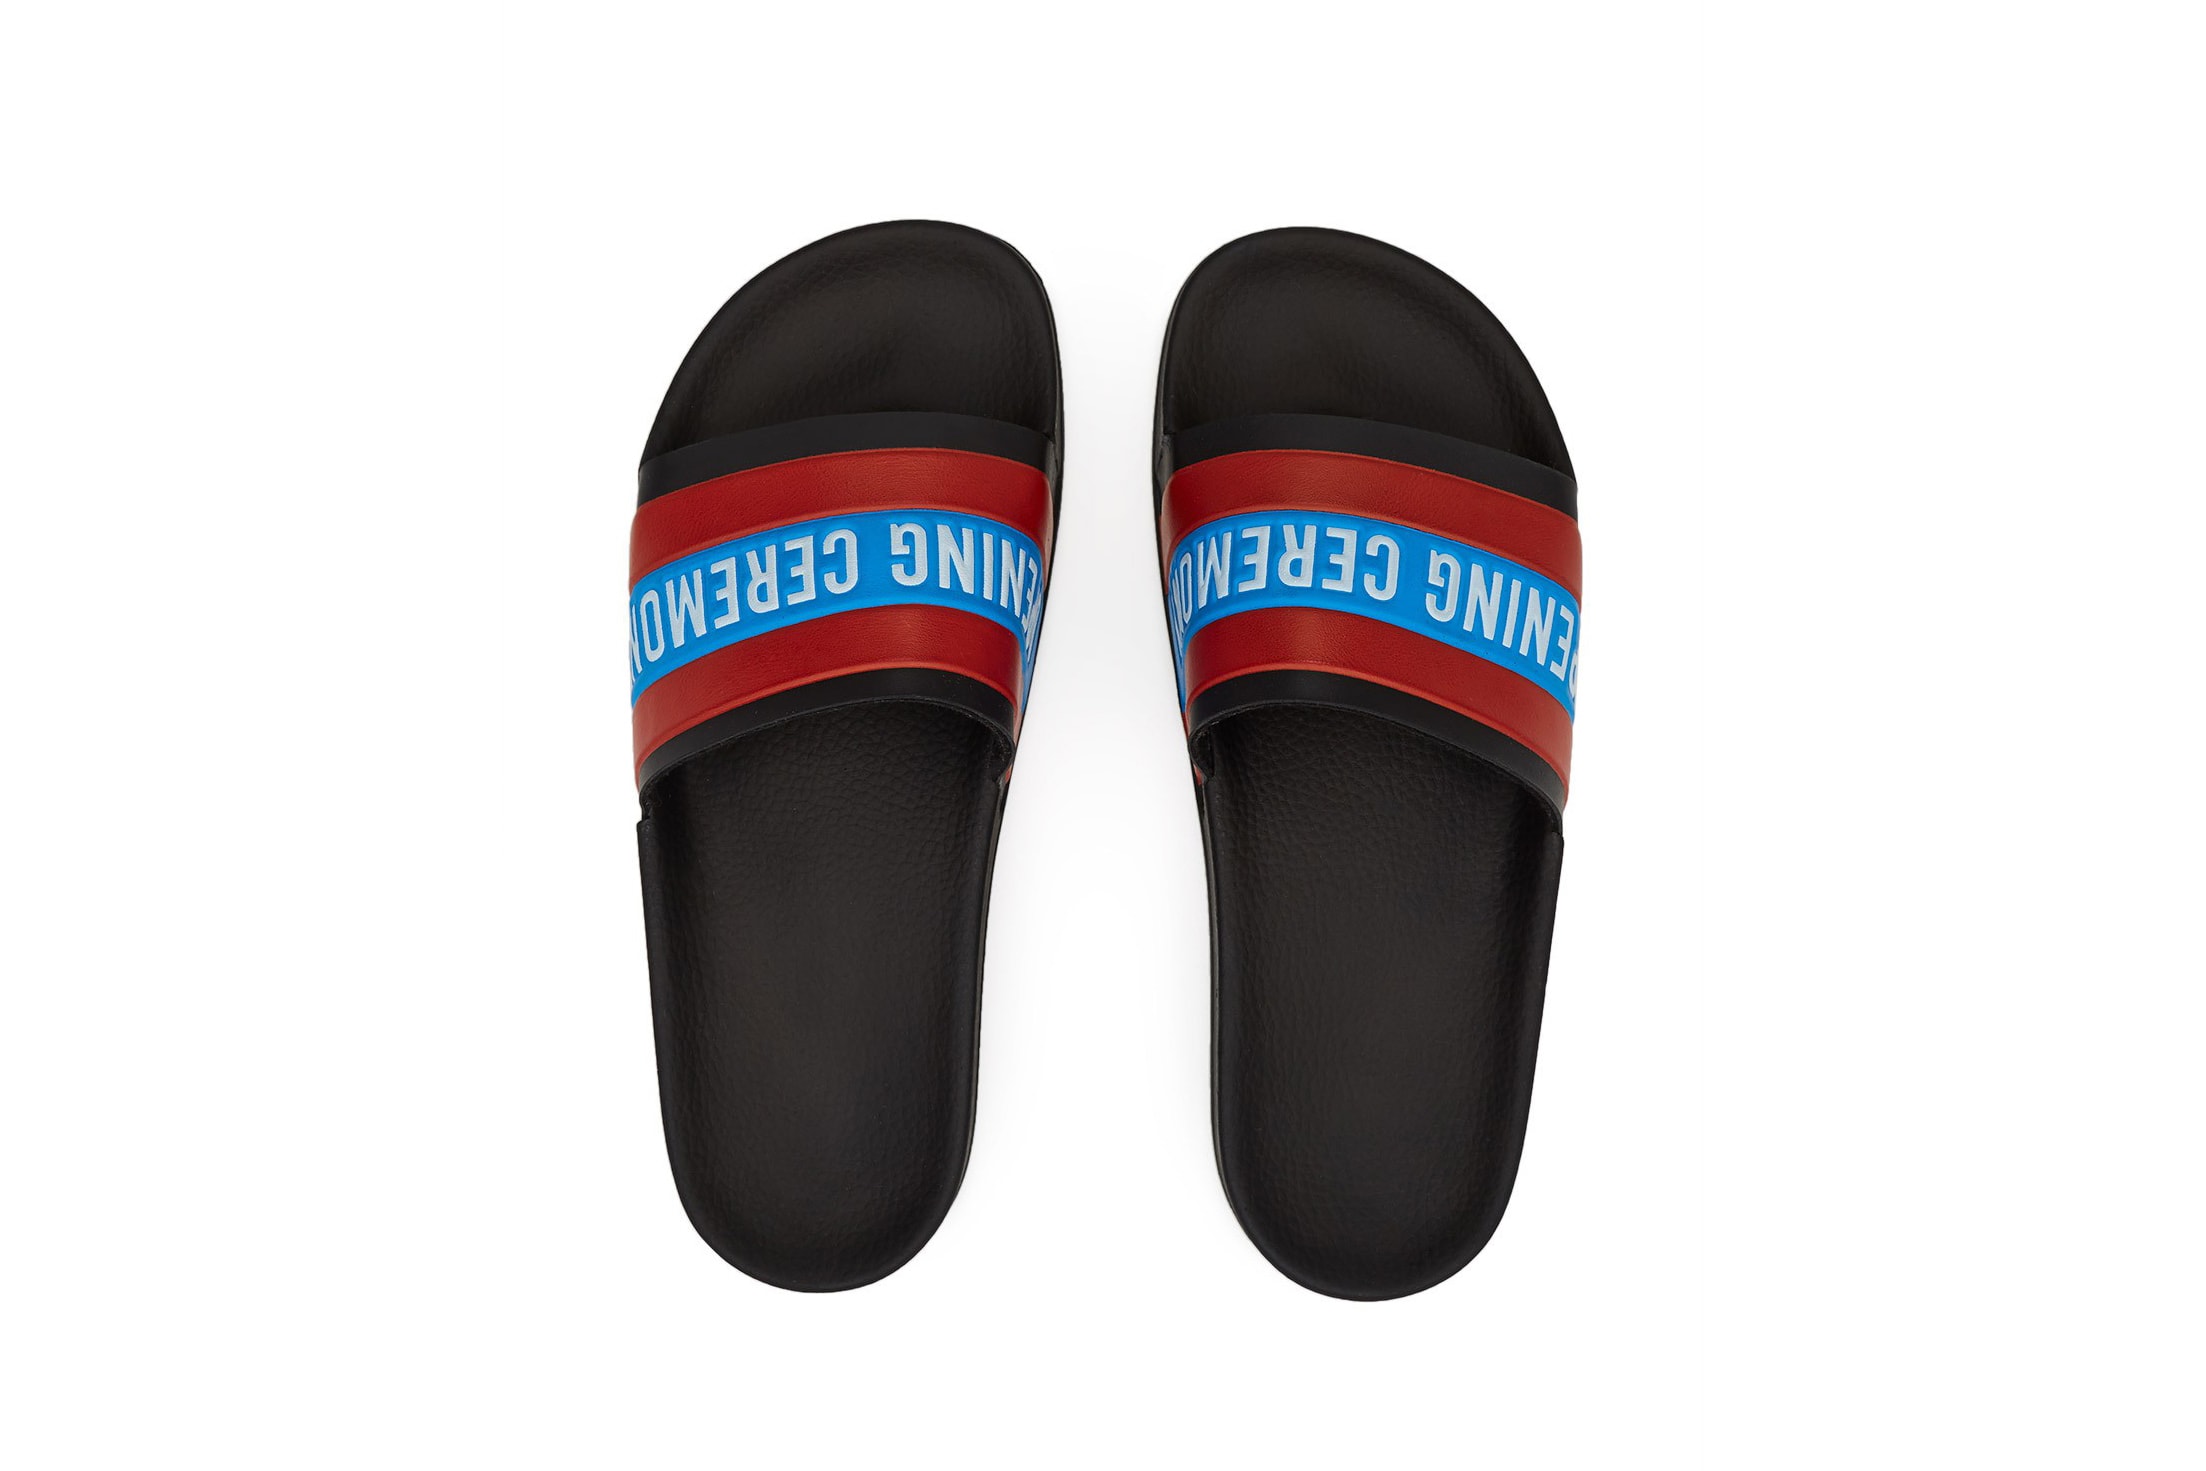 Opening Ceremony Colorful Rubber Slides Sandals Ace Green White Red Blue Black Strap Summer Spring Shoe